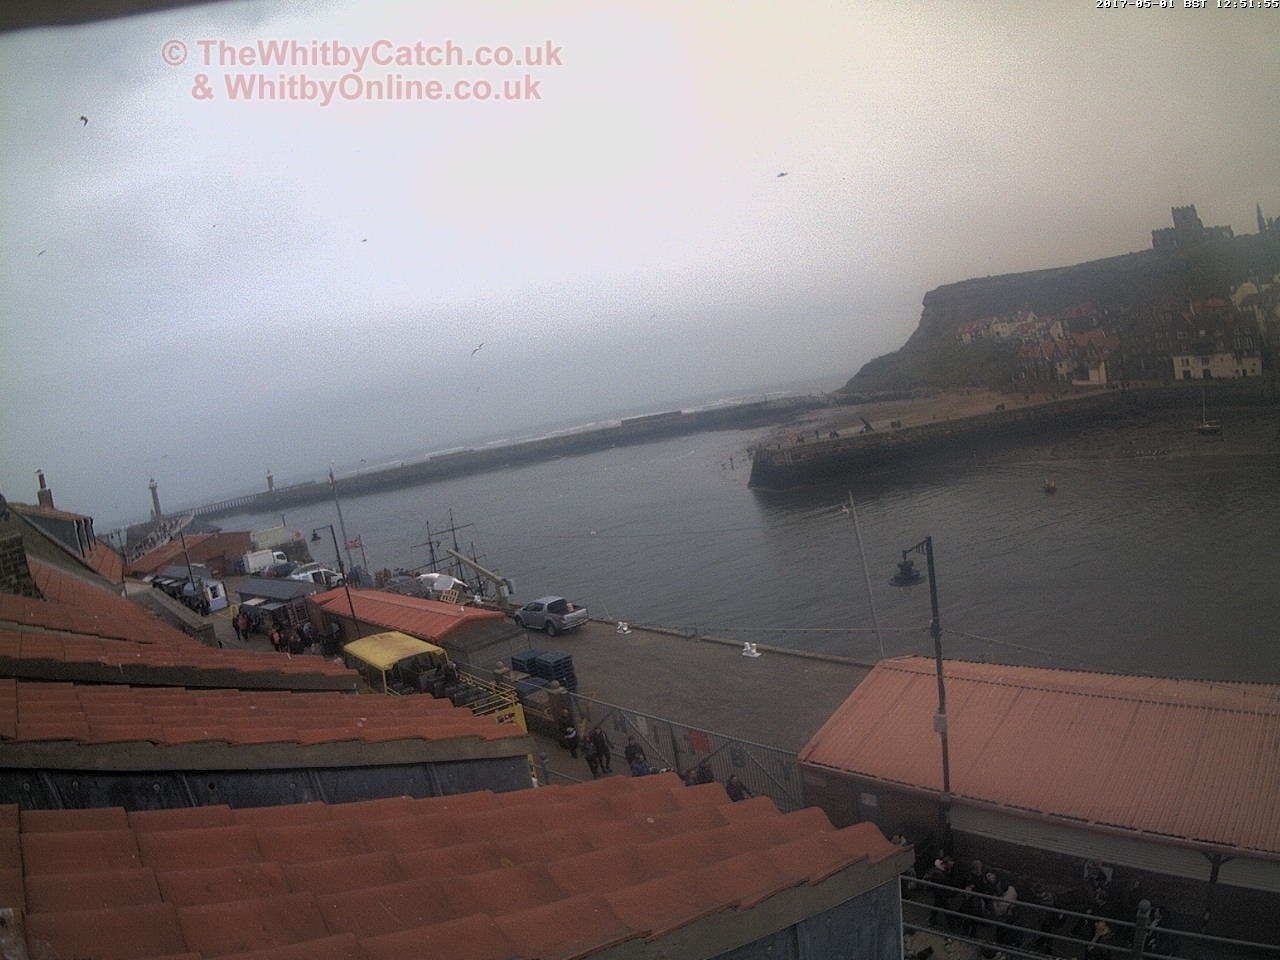 Whitby Mon 1st May 2017 12:52.